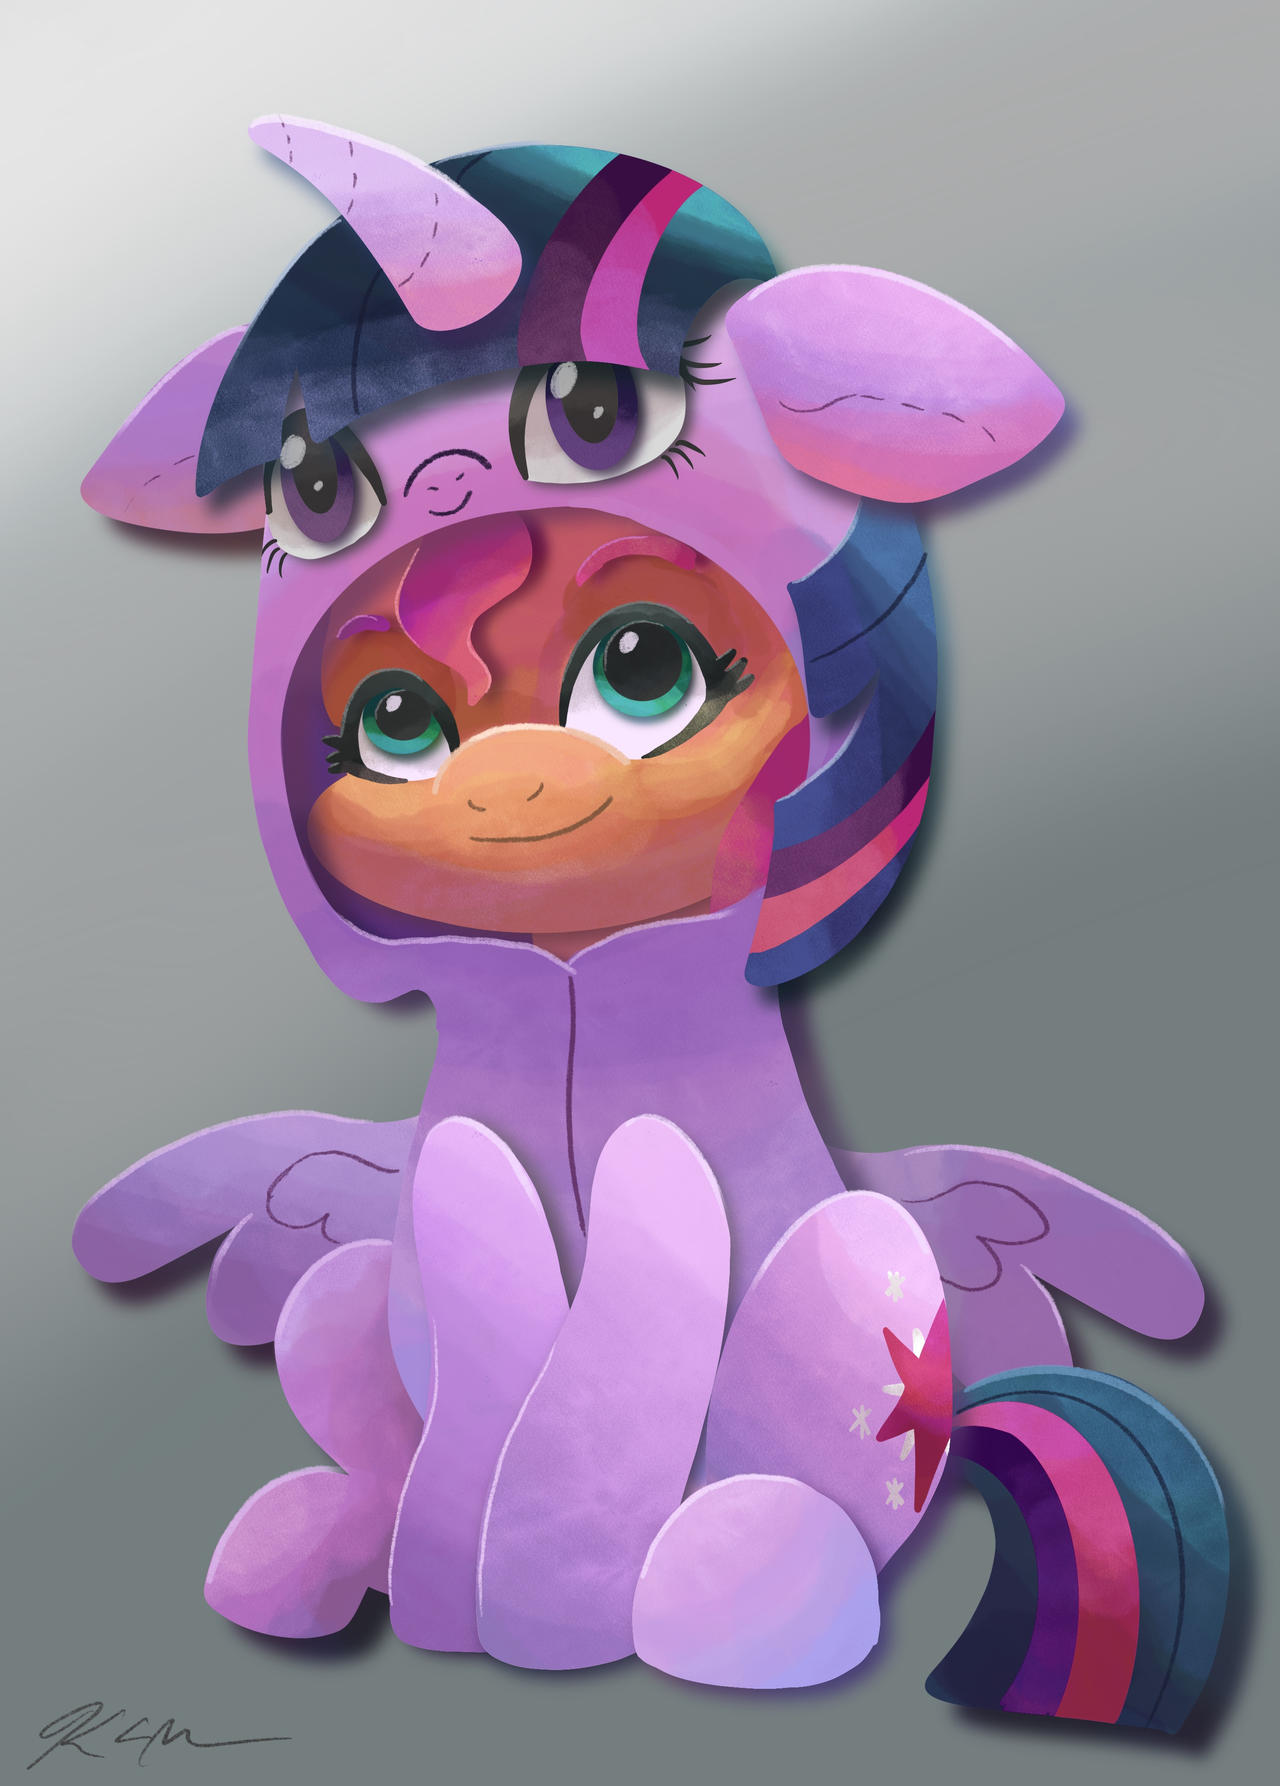 filly_sunny_in_a_kigurumi_by_catscratchpaper_det1cpz-fullview.jpg